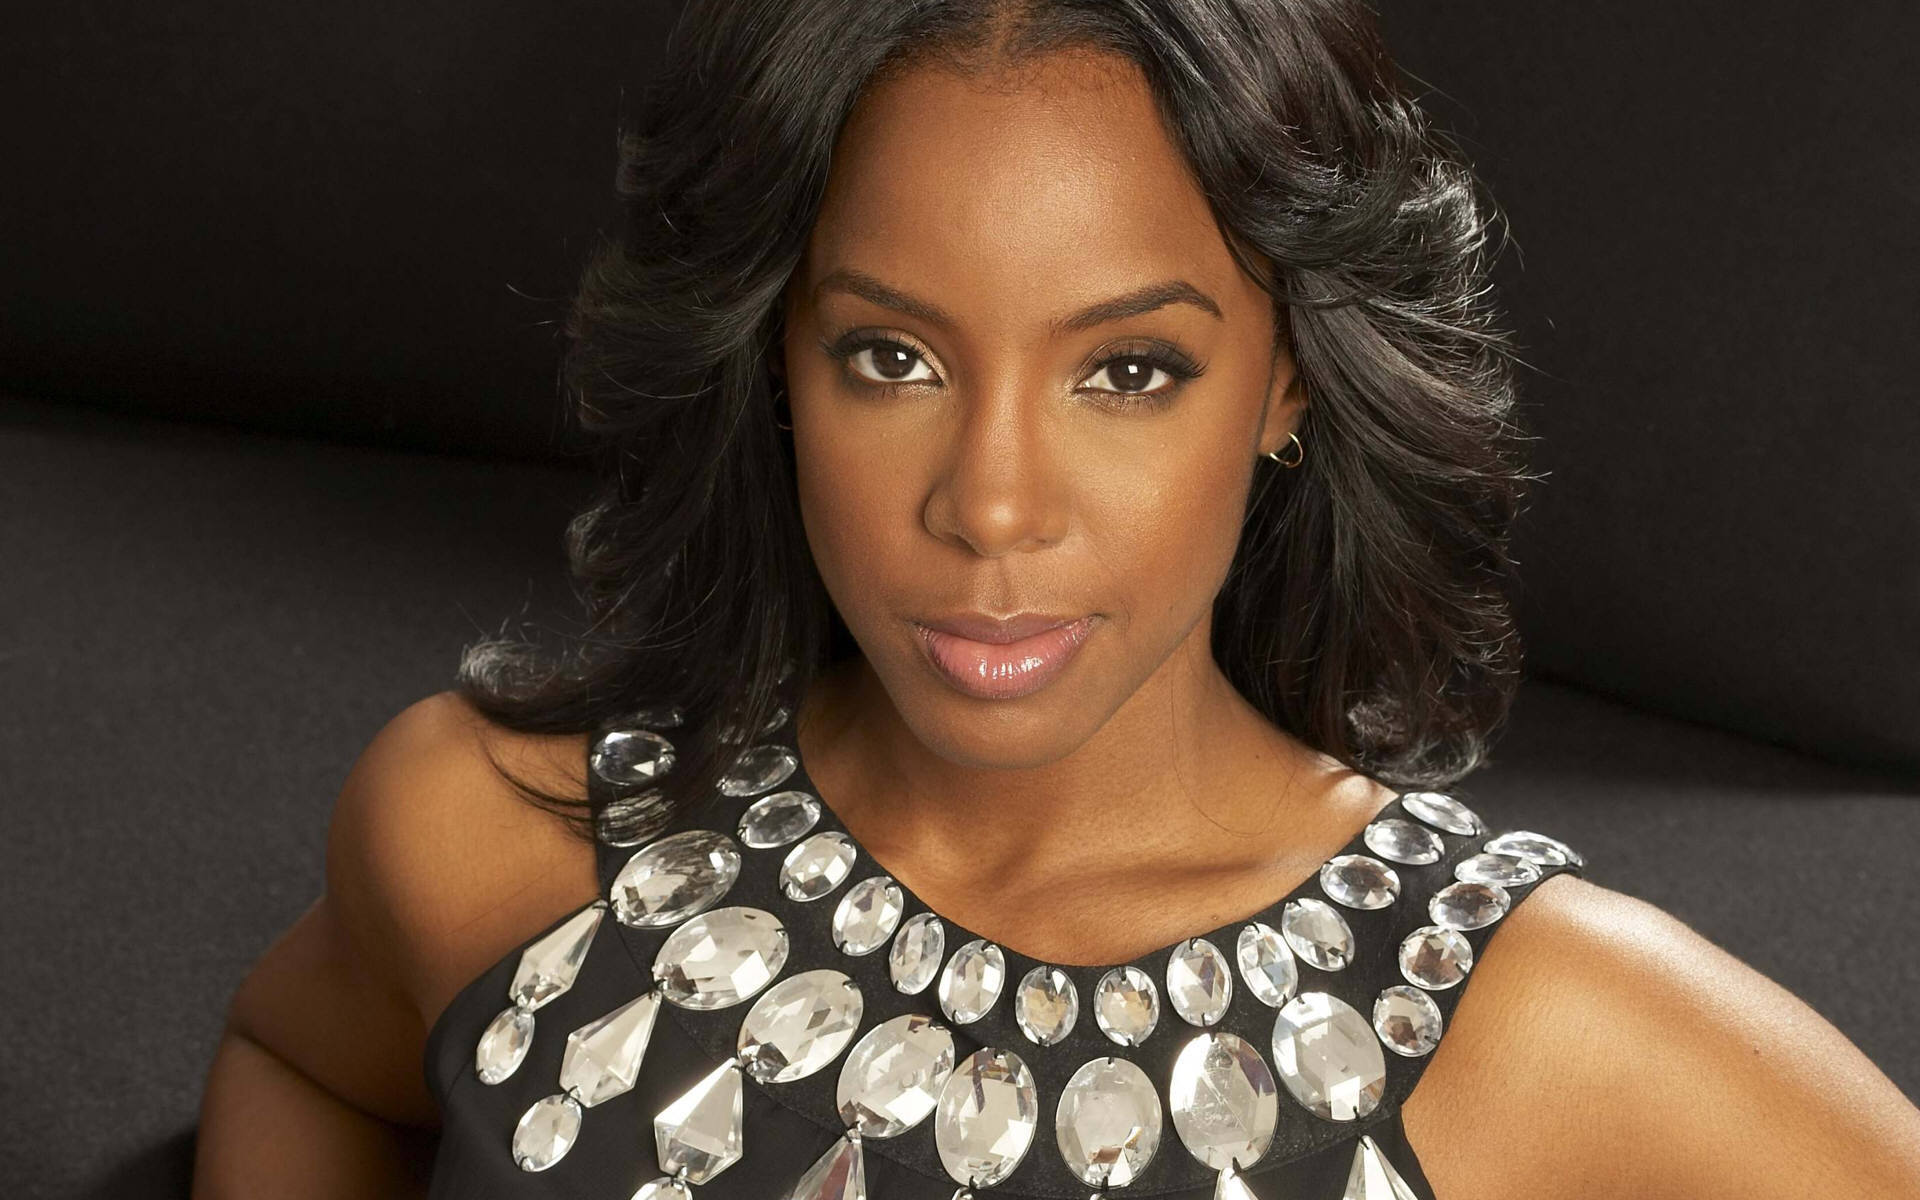 February 11th, wish happy birthday to beautiful American singer, songwriter, actress, Kelly Rowland. 